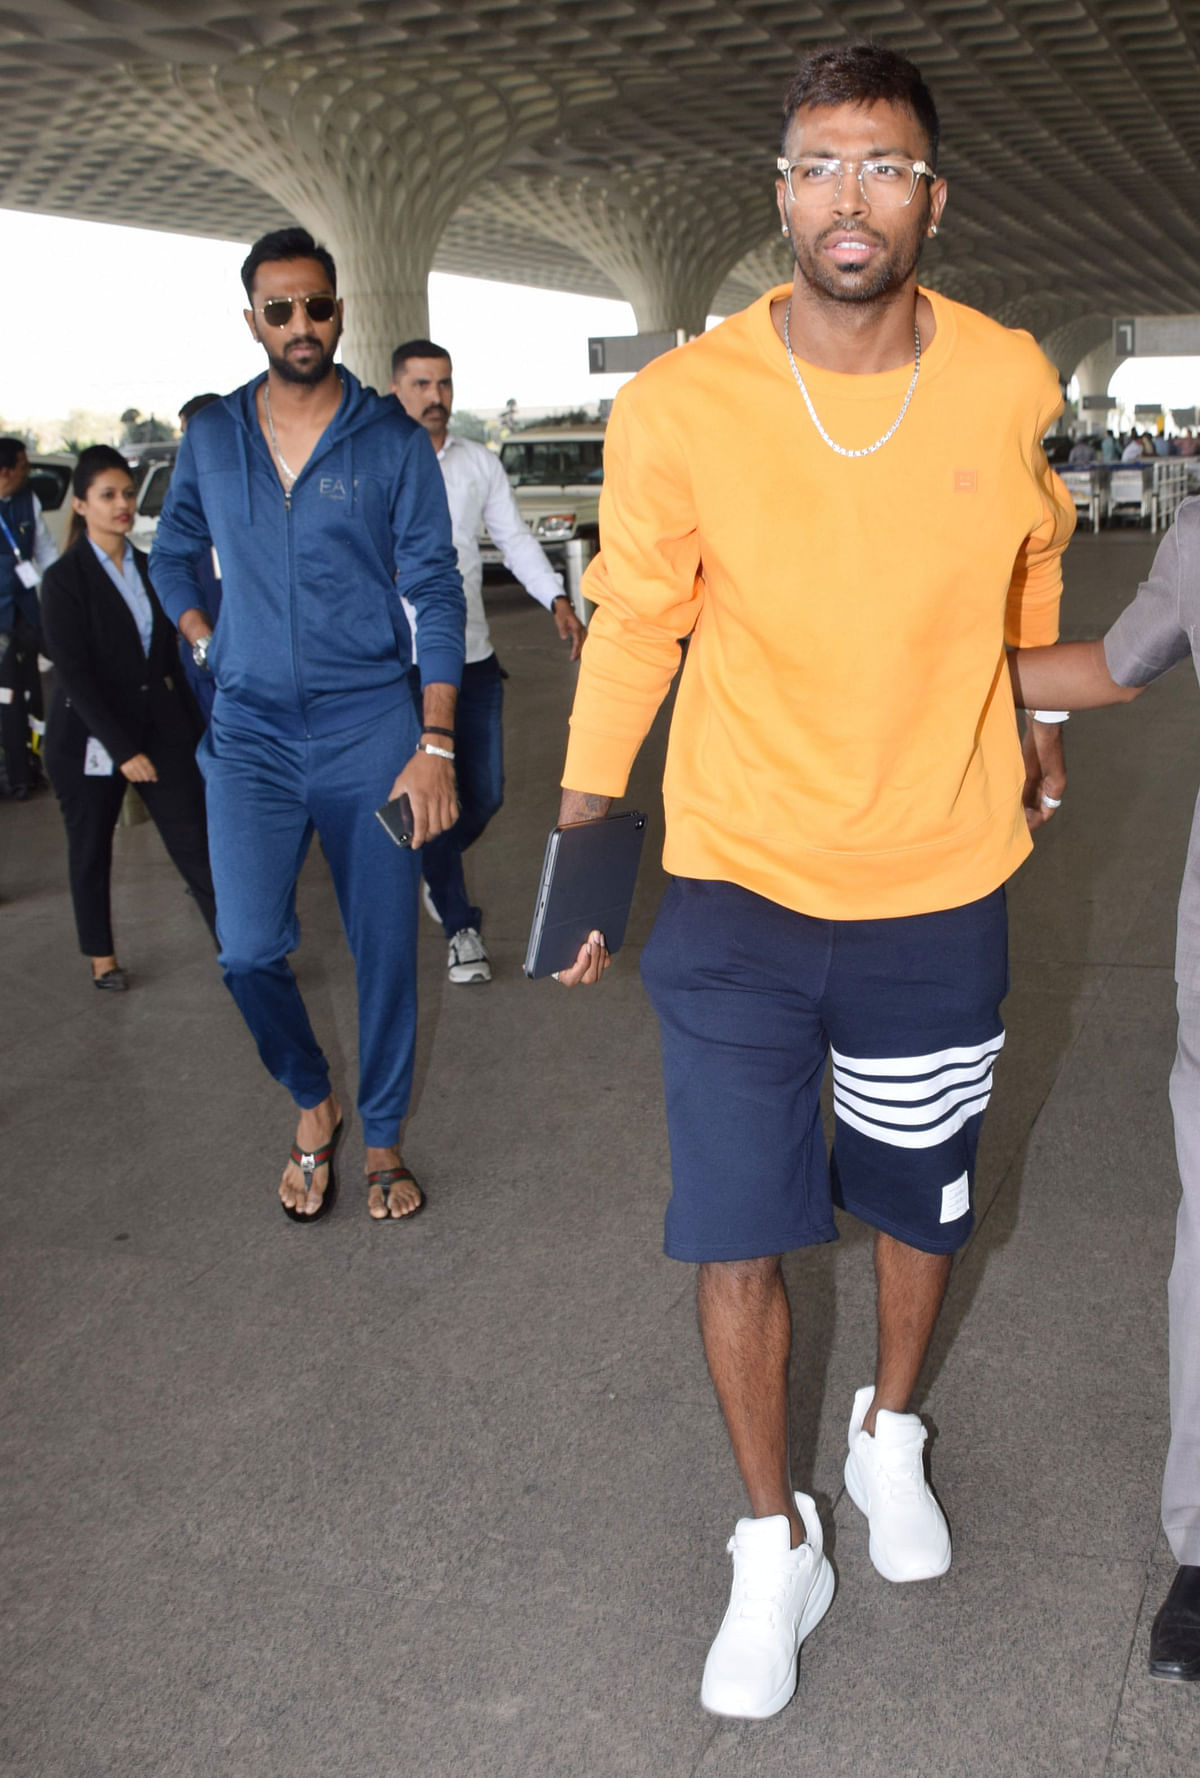 Under-fire Indian cricketer spotted at the Mumbai airport, with no clarity yet on the course of action against him.